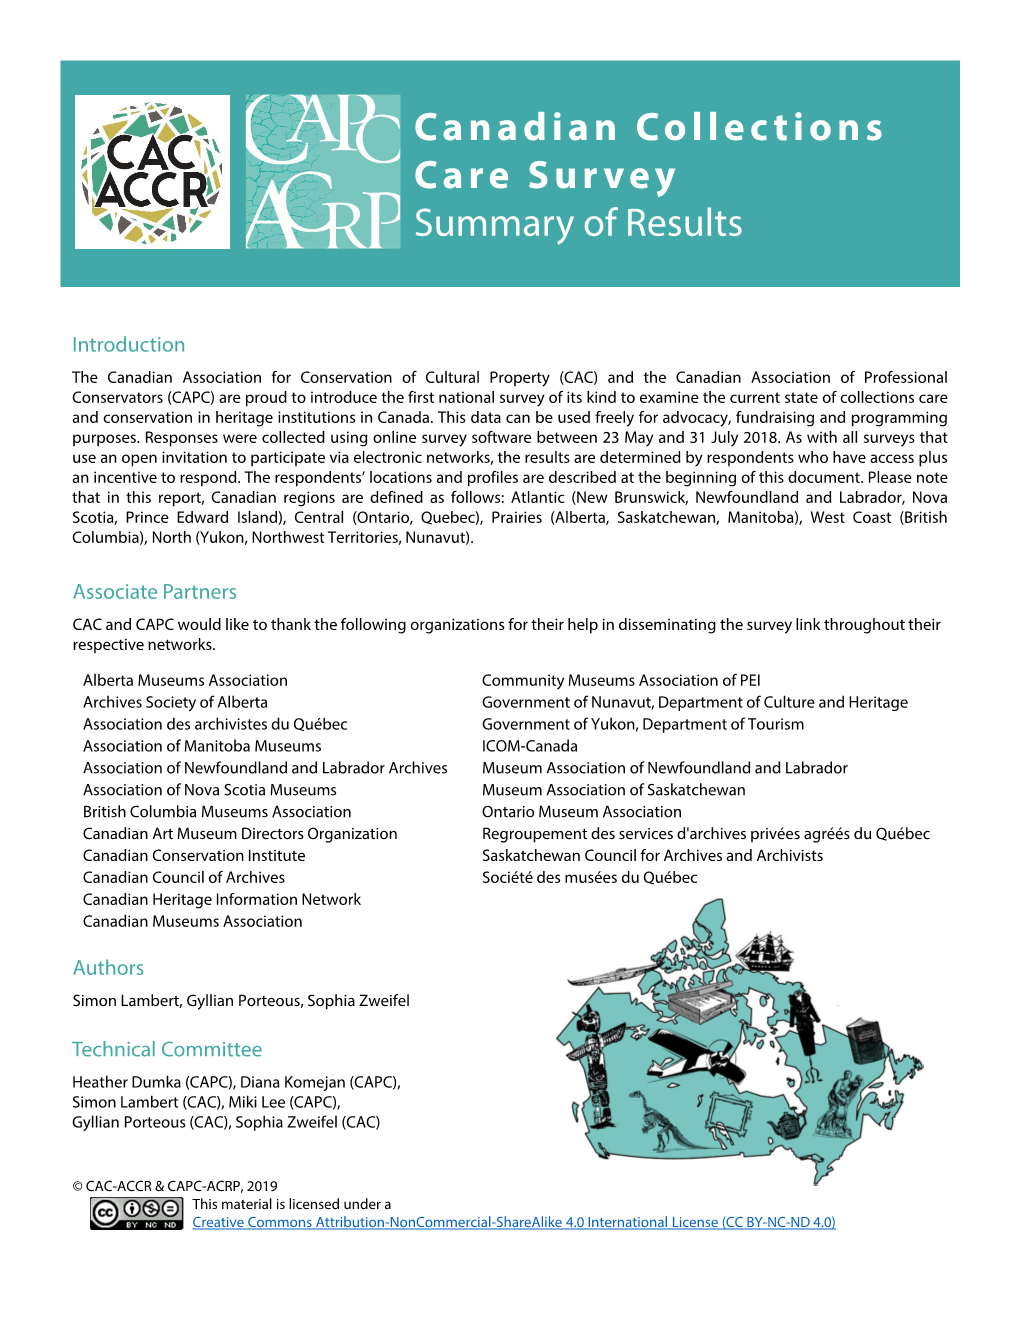 Canadian Collections Care Survey Summary of Results